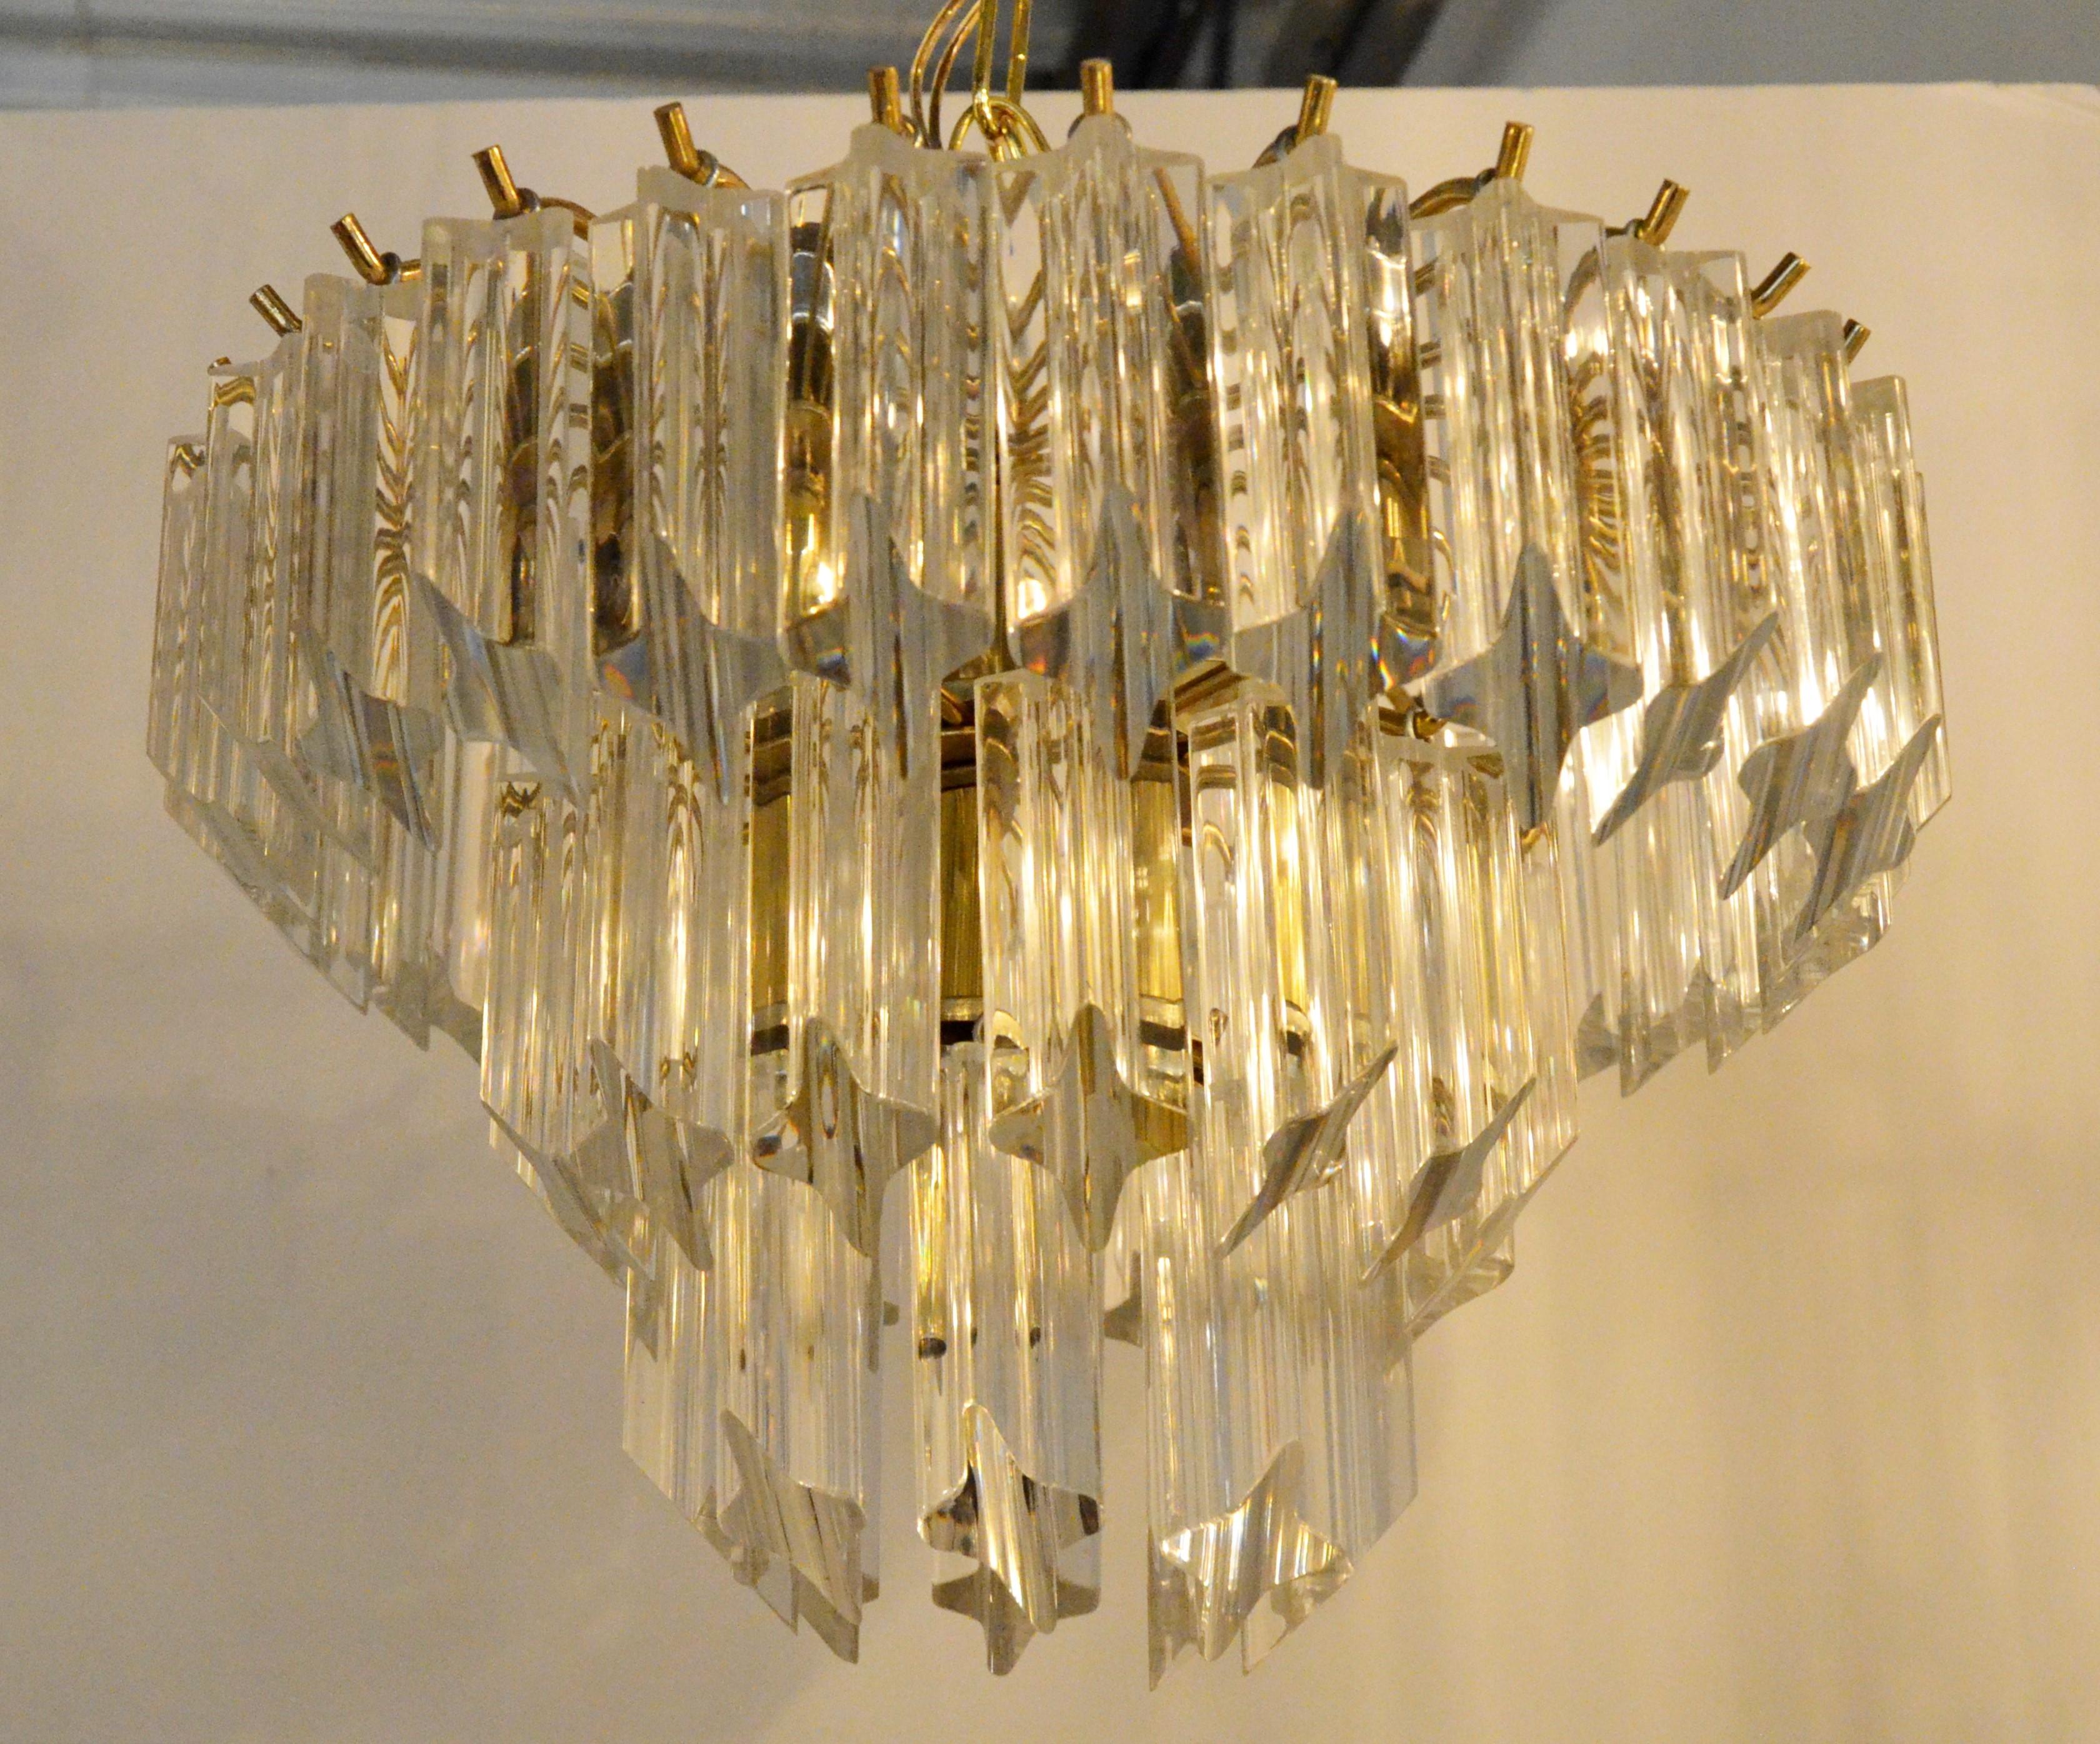 Lucite Hanging Triad Prisms with Brass Frame Venini Style Flushmount Chandelier In Good Condition For Sale In Houston, TX